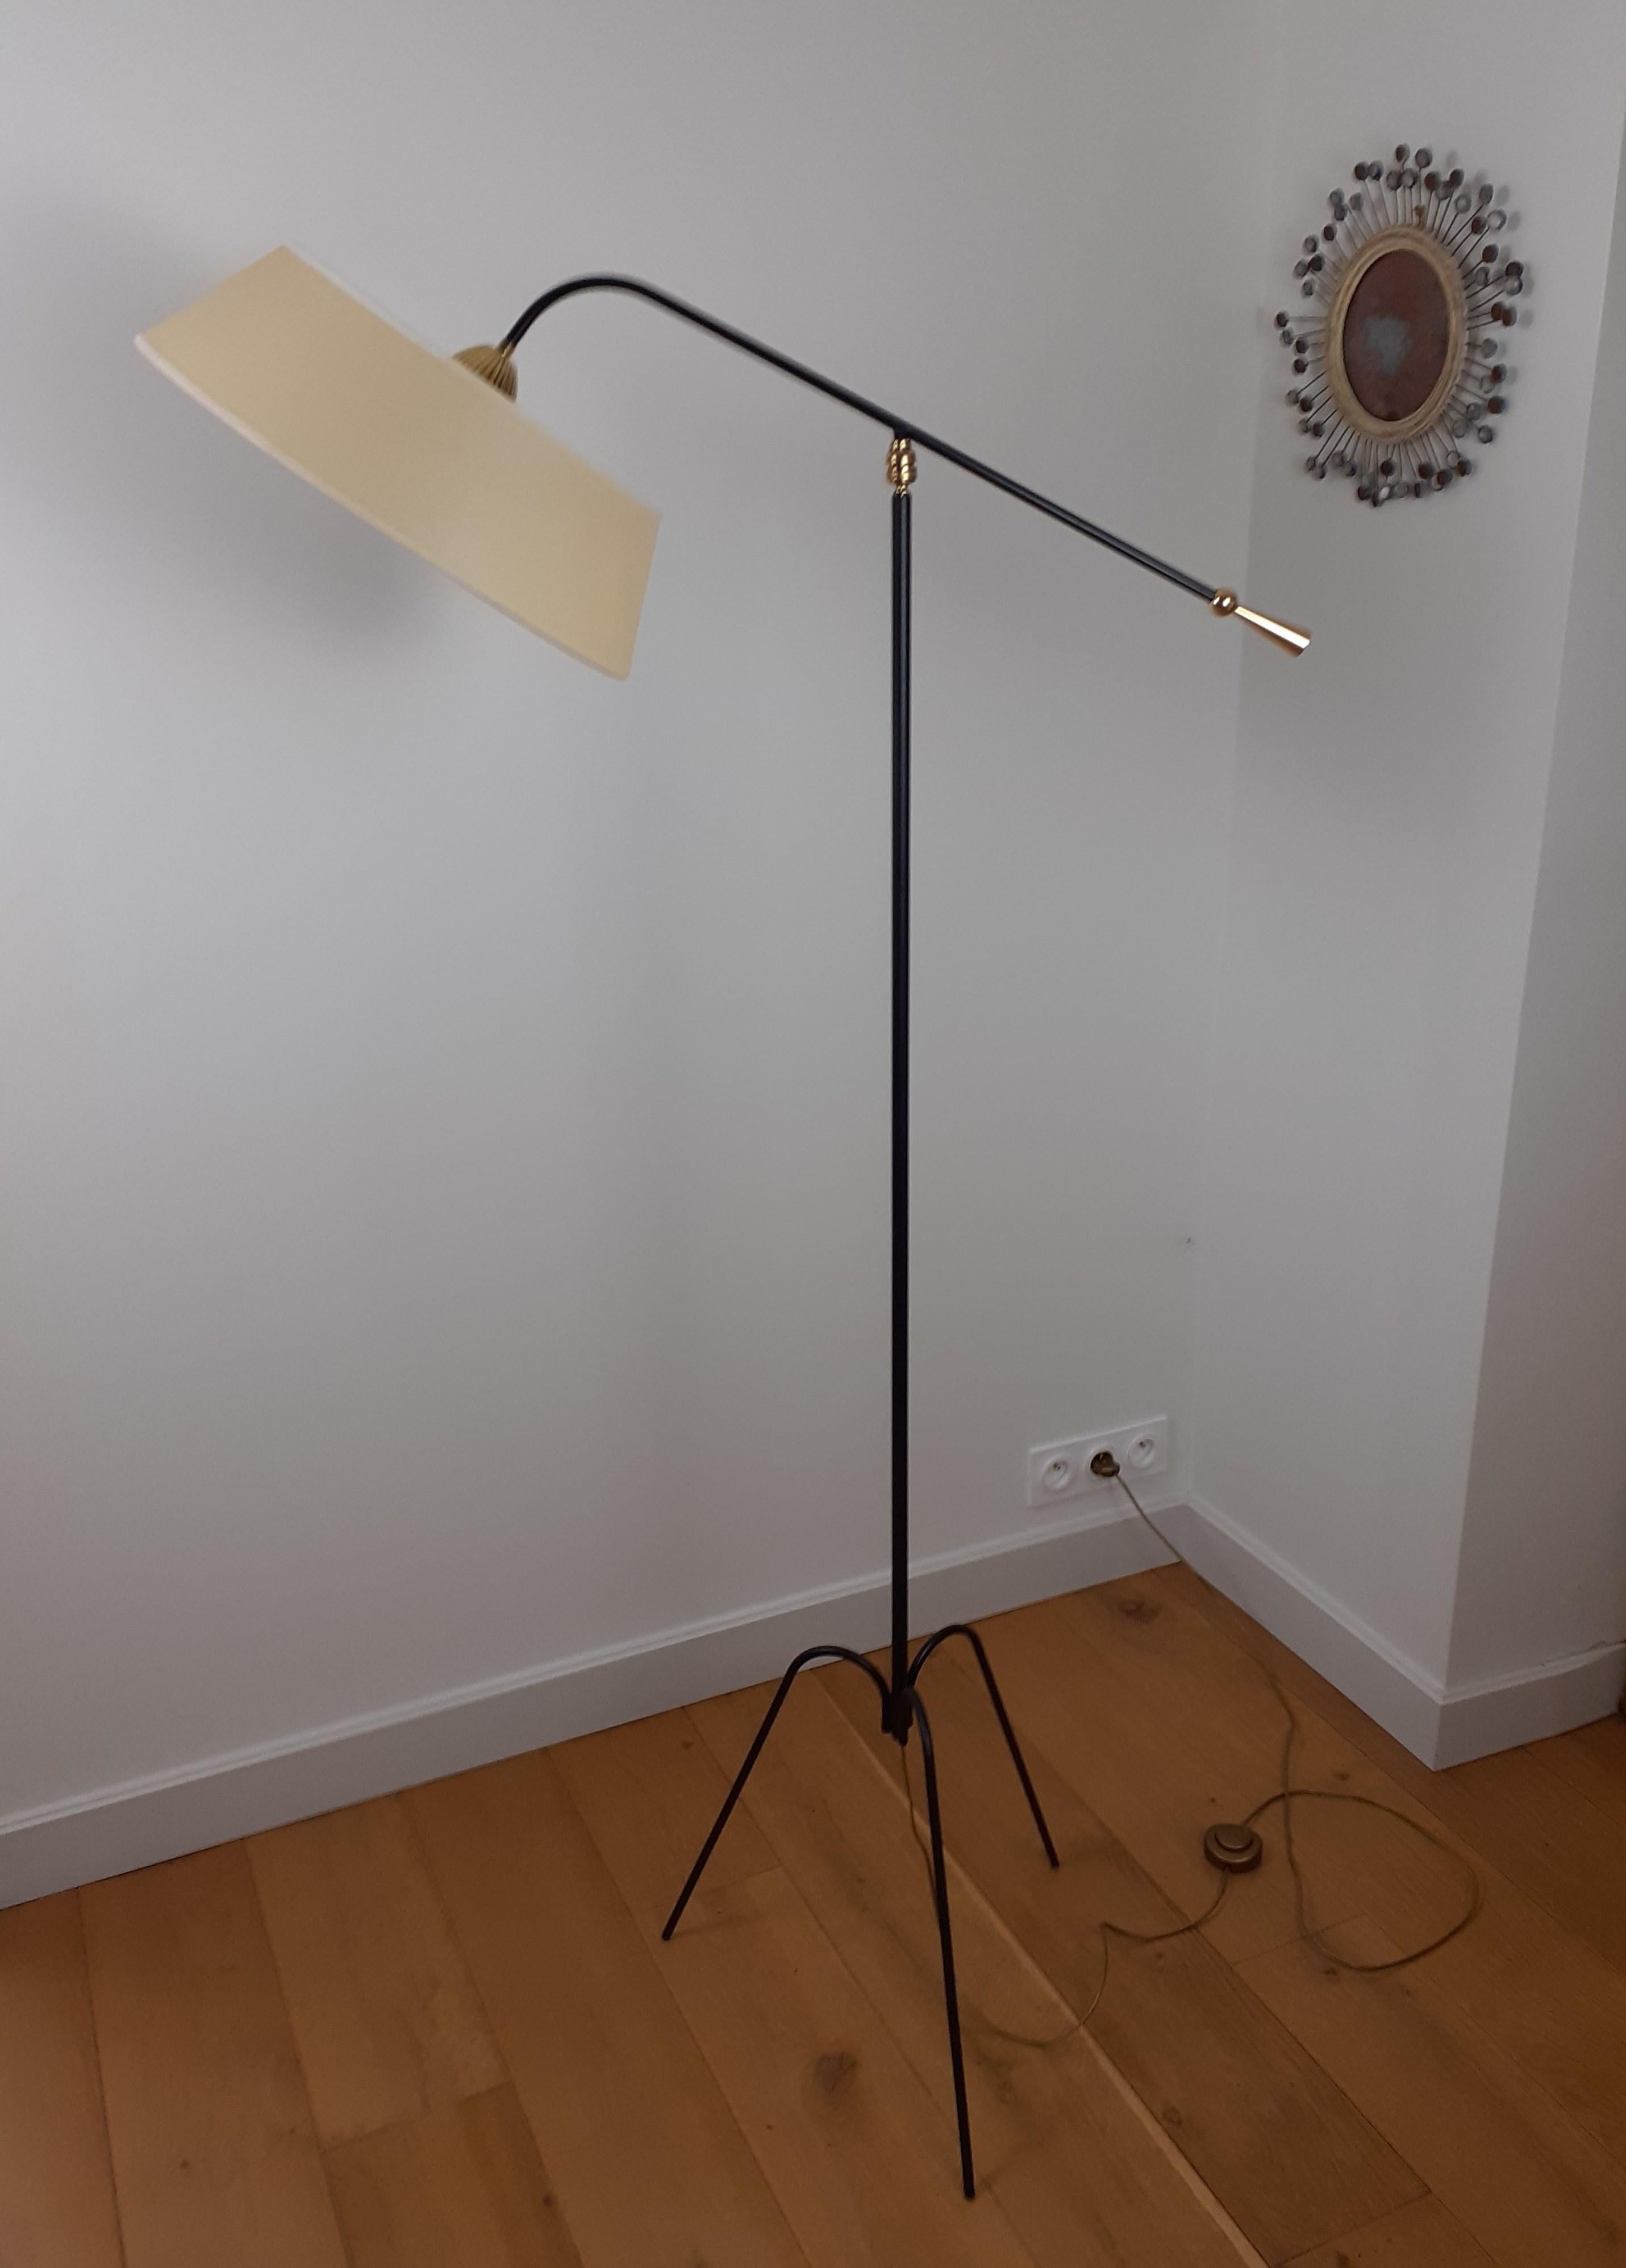 Floor lamp with pendulum and ball joint in black lacquered metal brass composed of a tripod foot in black lacquered metal.
A black lacquered metal arm fixed by a ball joint, supports a
a round and slightly conical shade.
At the other end of the